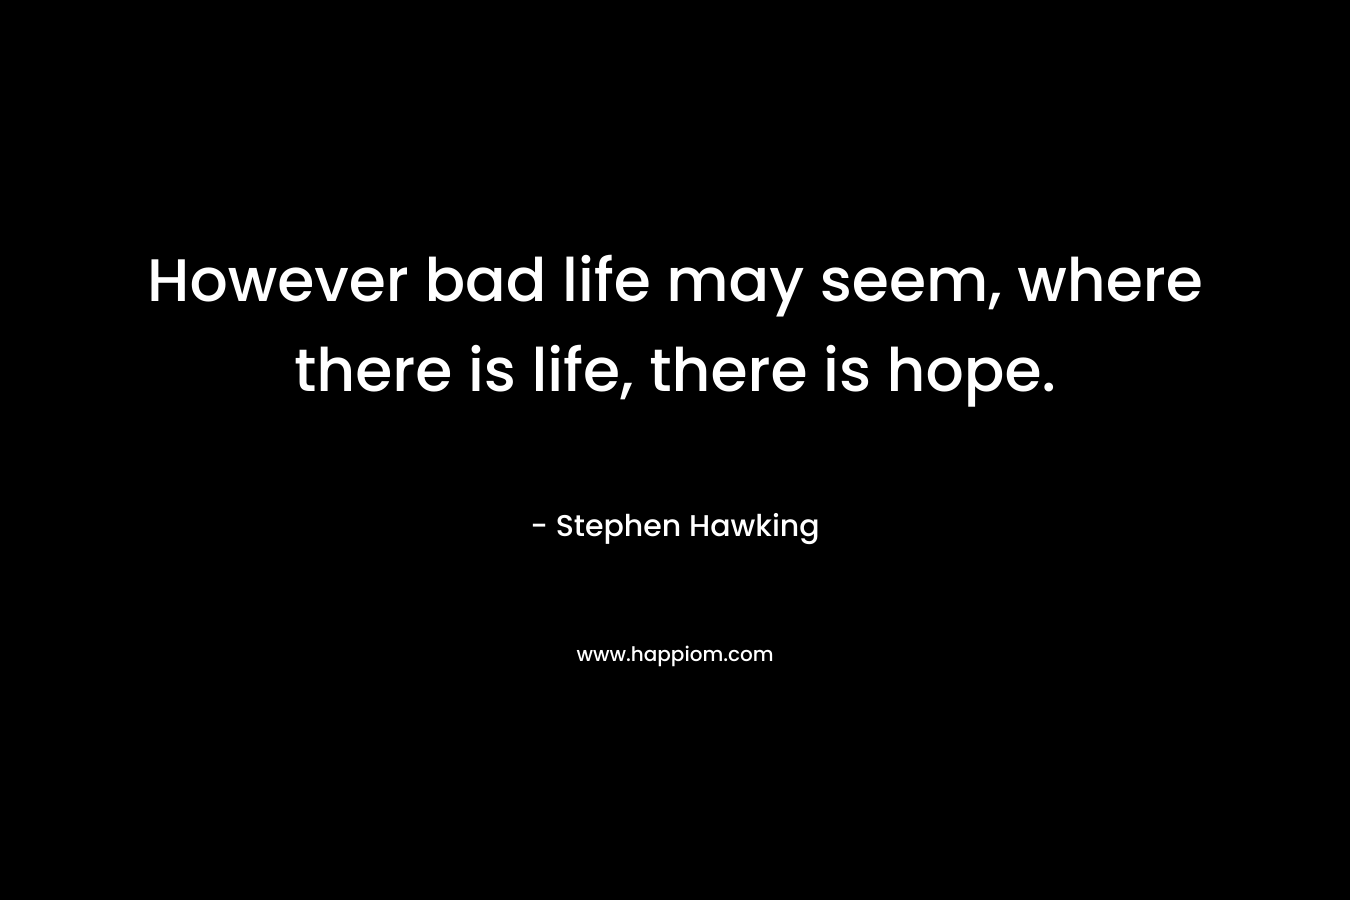 However bad life may seem, where there is life, there is hope.